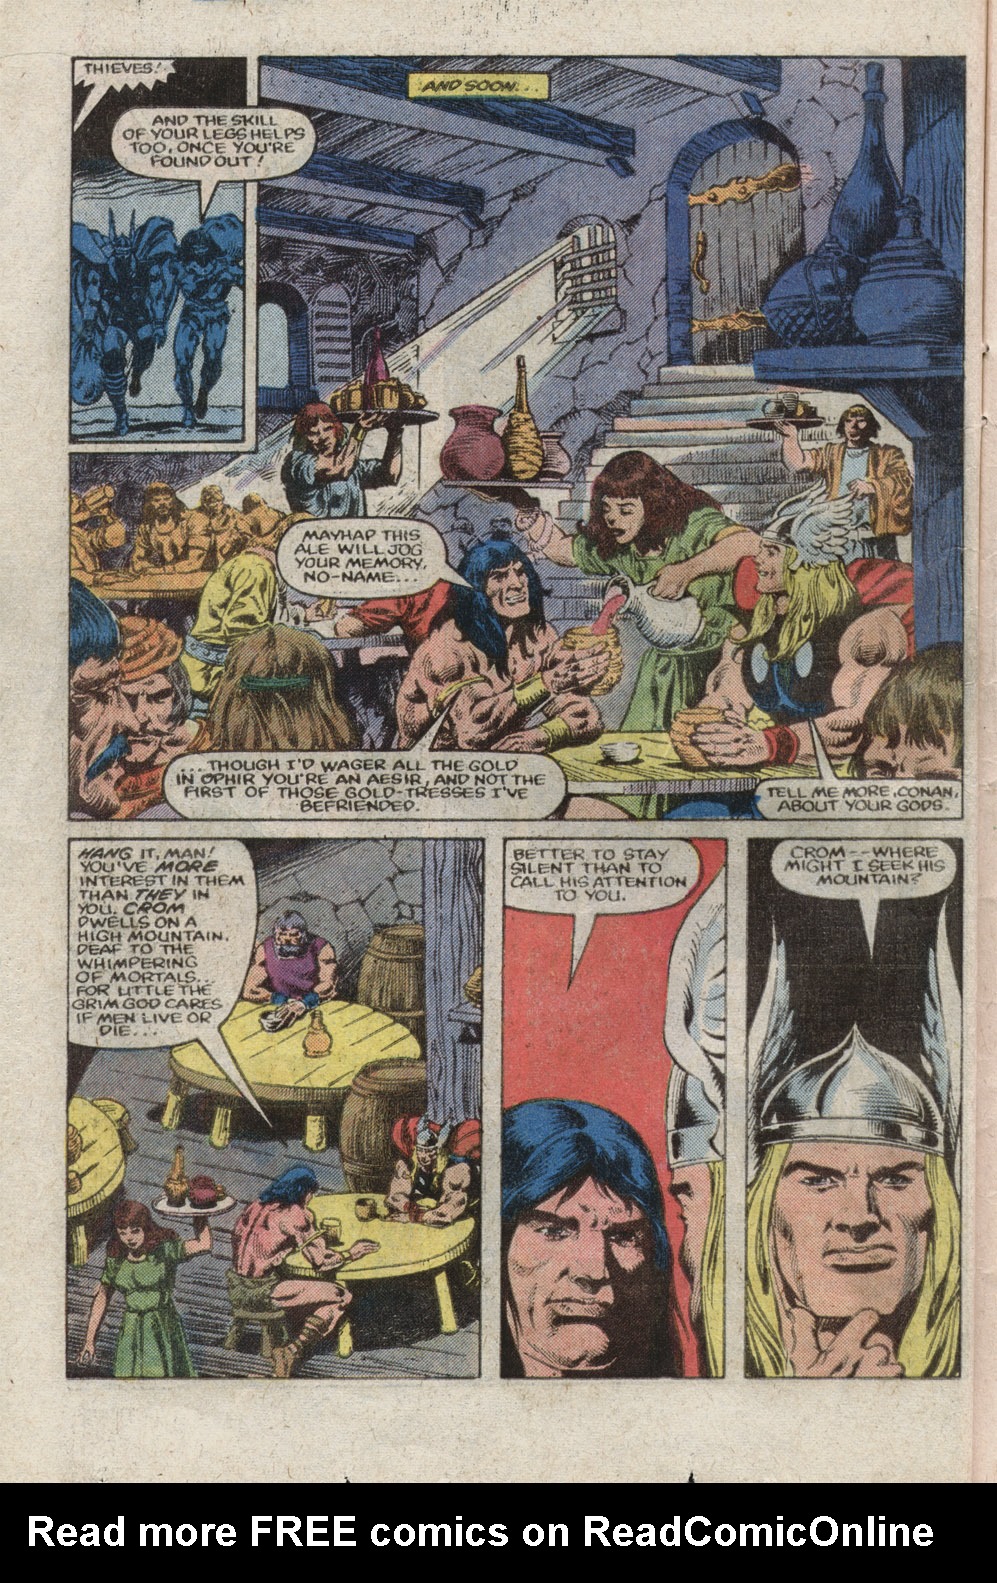 What If? (1977) issue 39 - Thor battled conan - Page 18